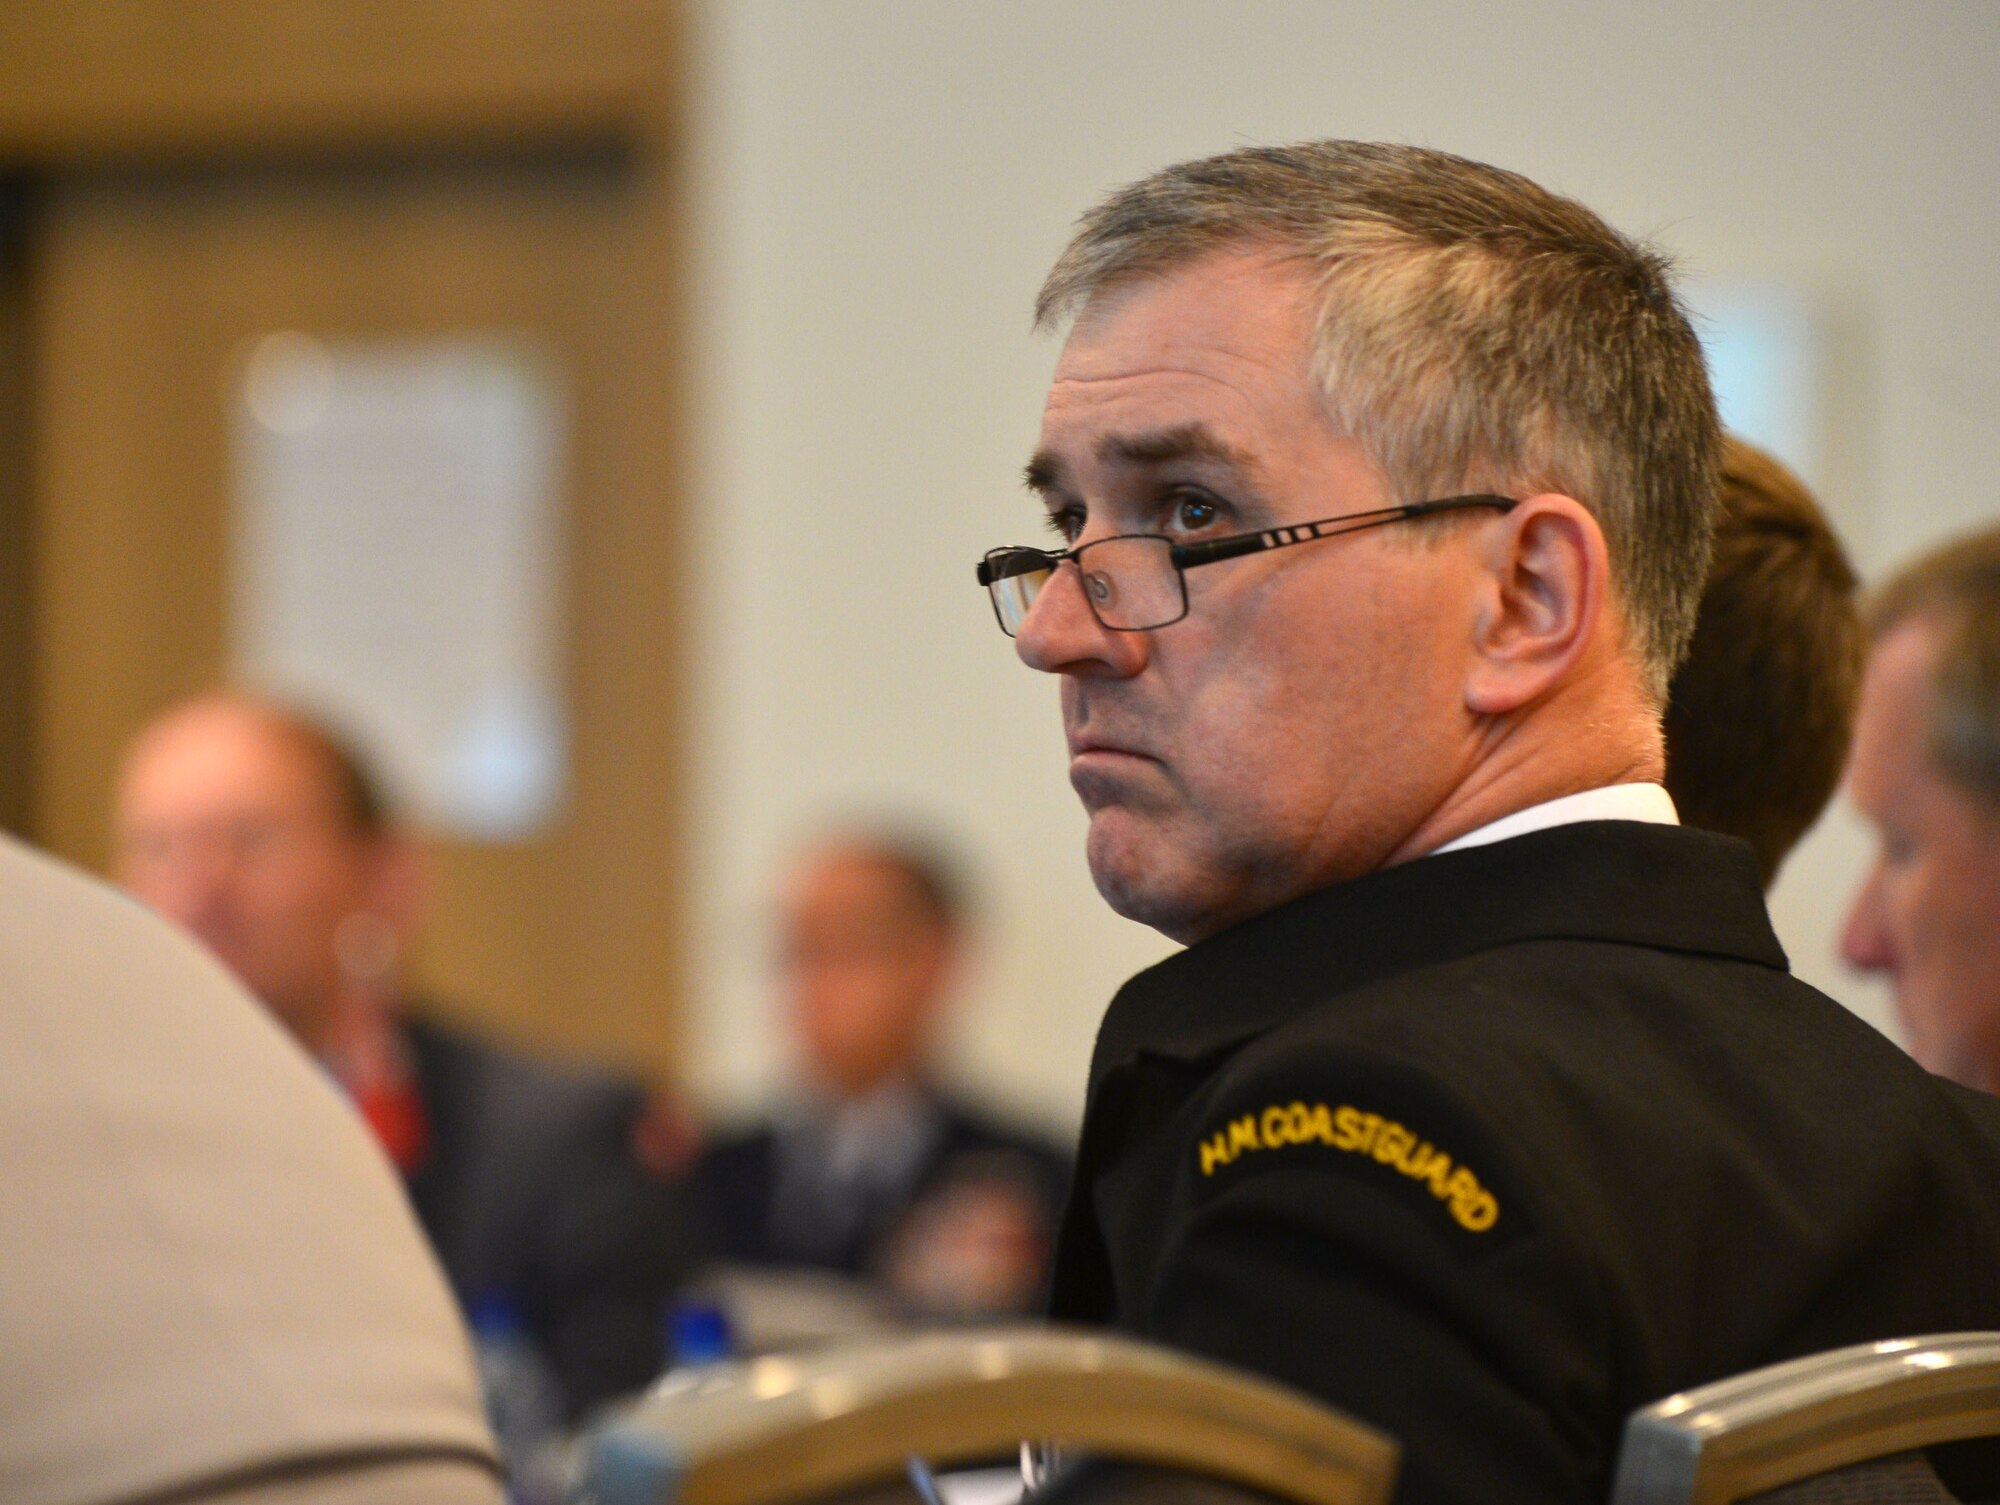 Roly McKie, Her Majesty's Coast Guard, listens to a presentation during the Arctic Security Forces Roundtable, May 12, 2015 in Reykjavik, Iceland. Representatives from 11 nations across Europe and North America met for the ASFR in order to promote regional understanding and enhance multilateral security operations within the Arctic area. The United Kingdom was one of four observer nations present at the conference. (U.S. Air Force photo by 2nd Lt. Meredith Mulvihill/Released)